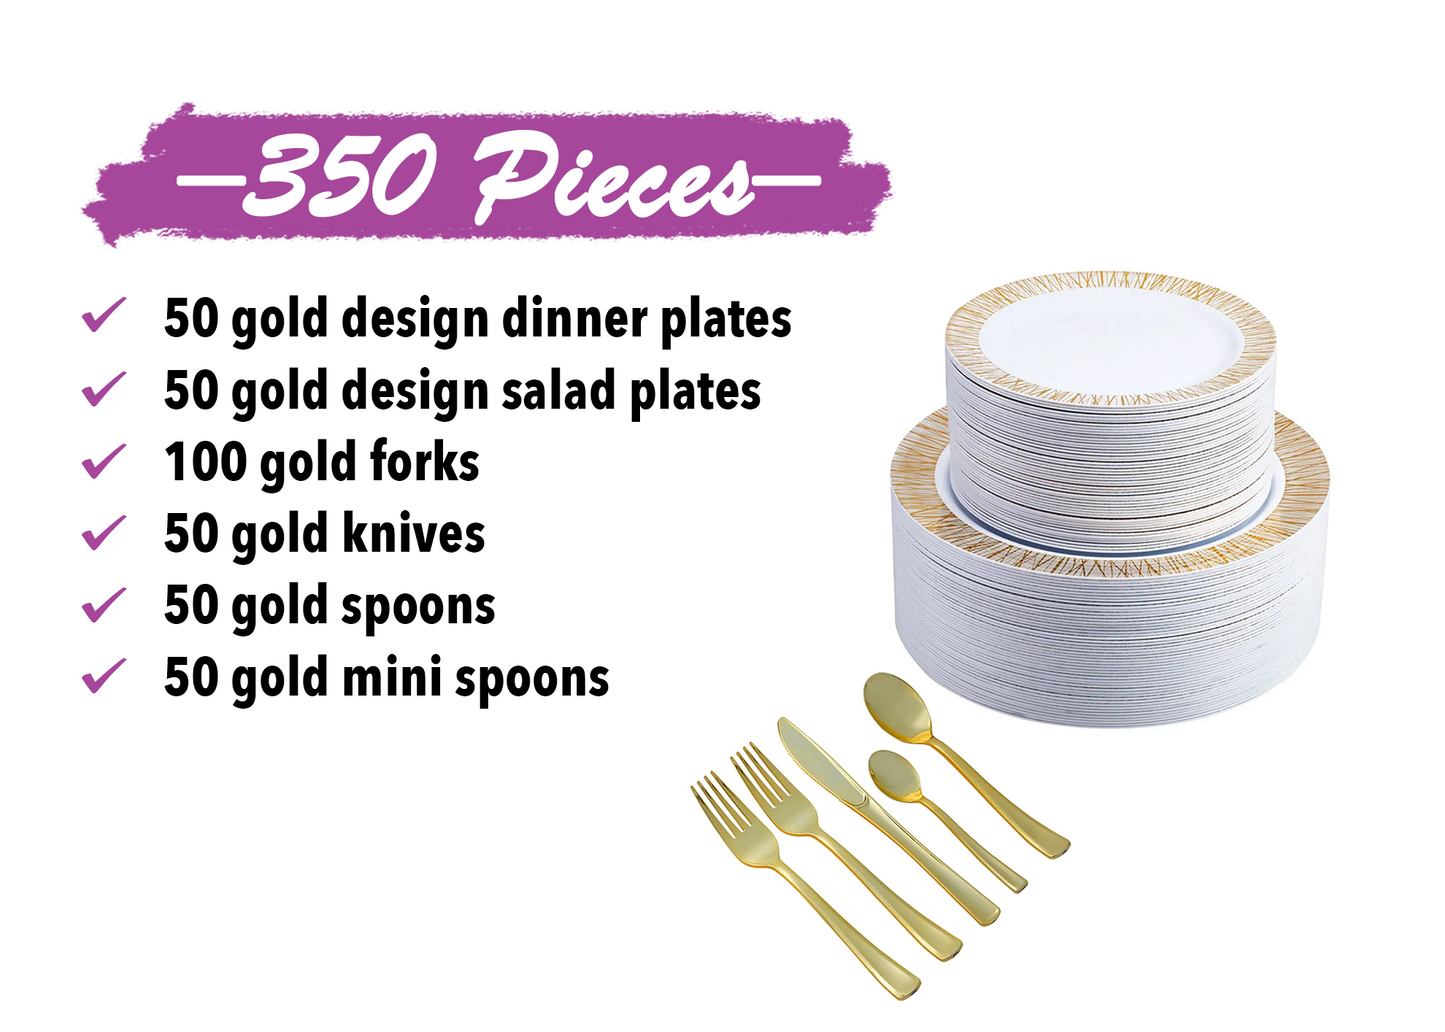 350-Piece Gold Dinnerware set for 50 guests Includes: 100 gold design plastic plates, 250 gold plastic silverware utensils